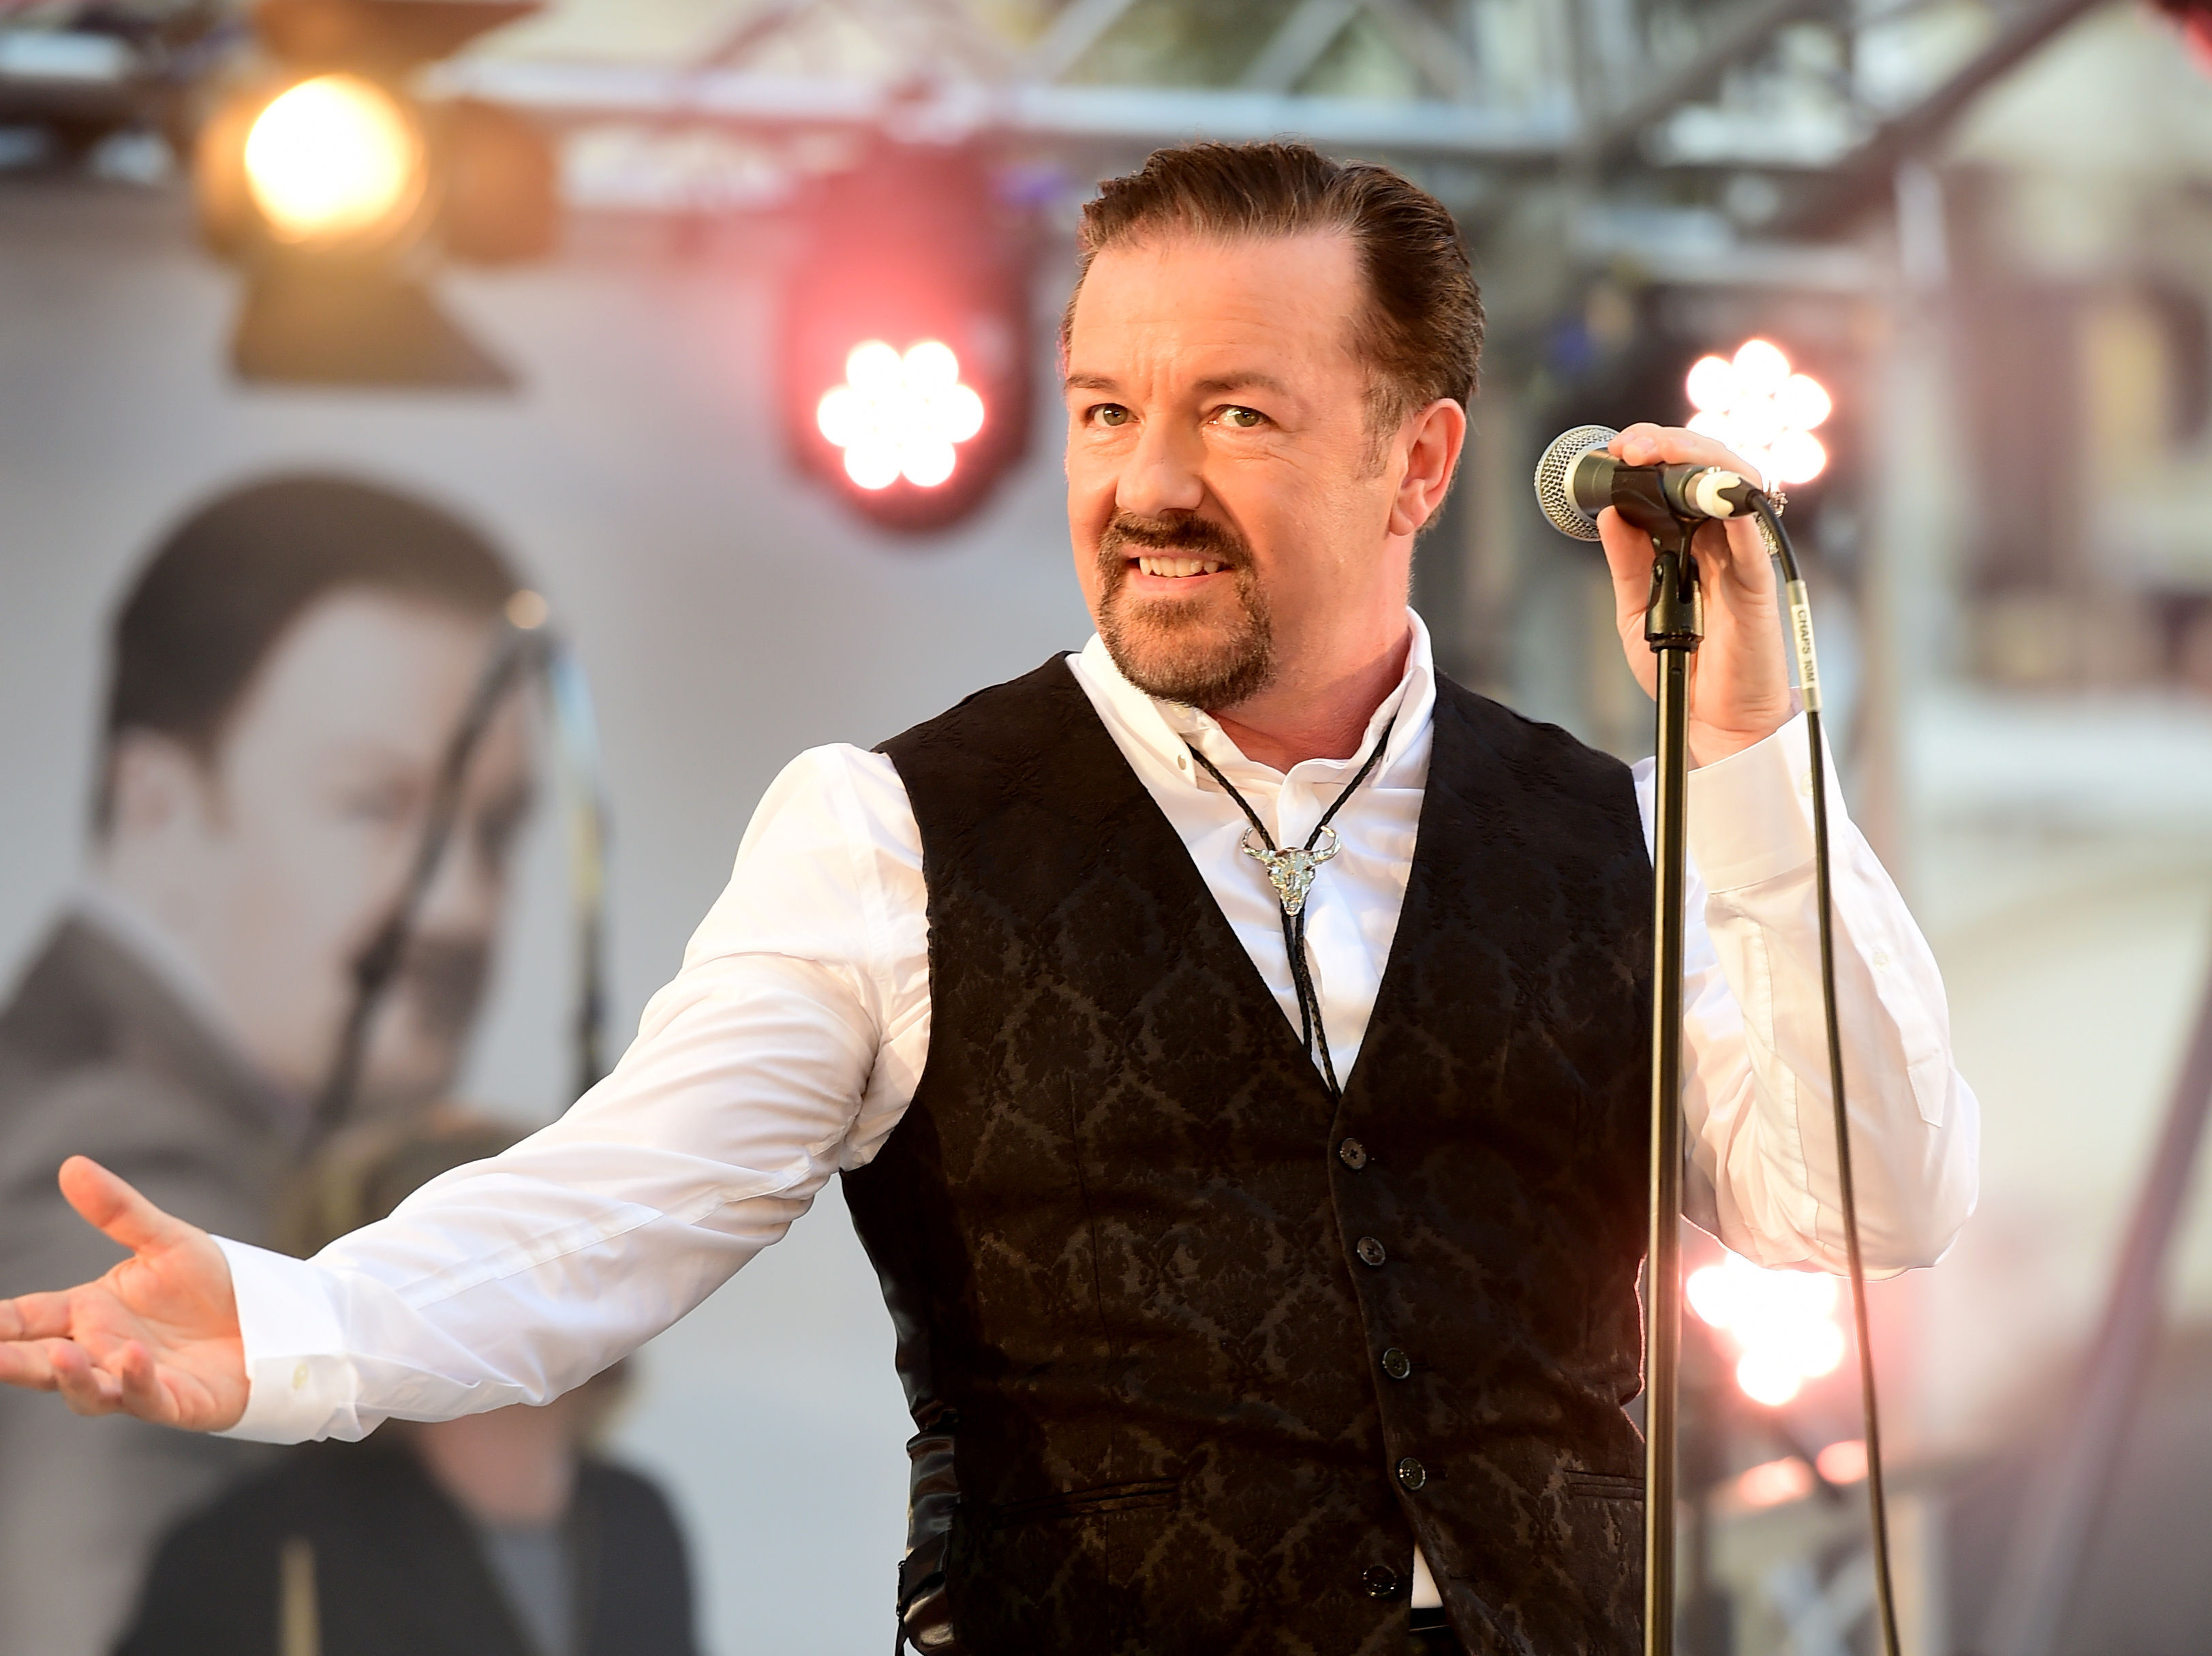 ap foto : ian west : ricky gervais as david brent attends the world premiere of 'david brent: life on the road' at leicester square, london, wednesday, aug. 10, 2016. (ian west/pa via ap) united kingdom out no sales no archive photograph cannot be stored or used for more than 14 days after the day of transmissio ricky gervai britain david brent premier automatarkiverad